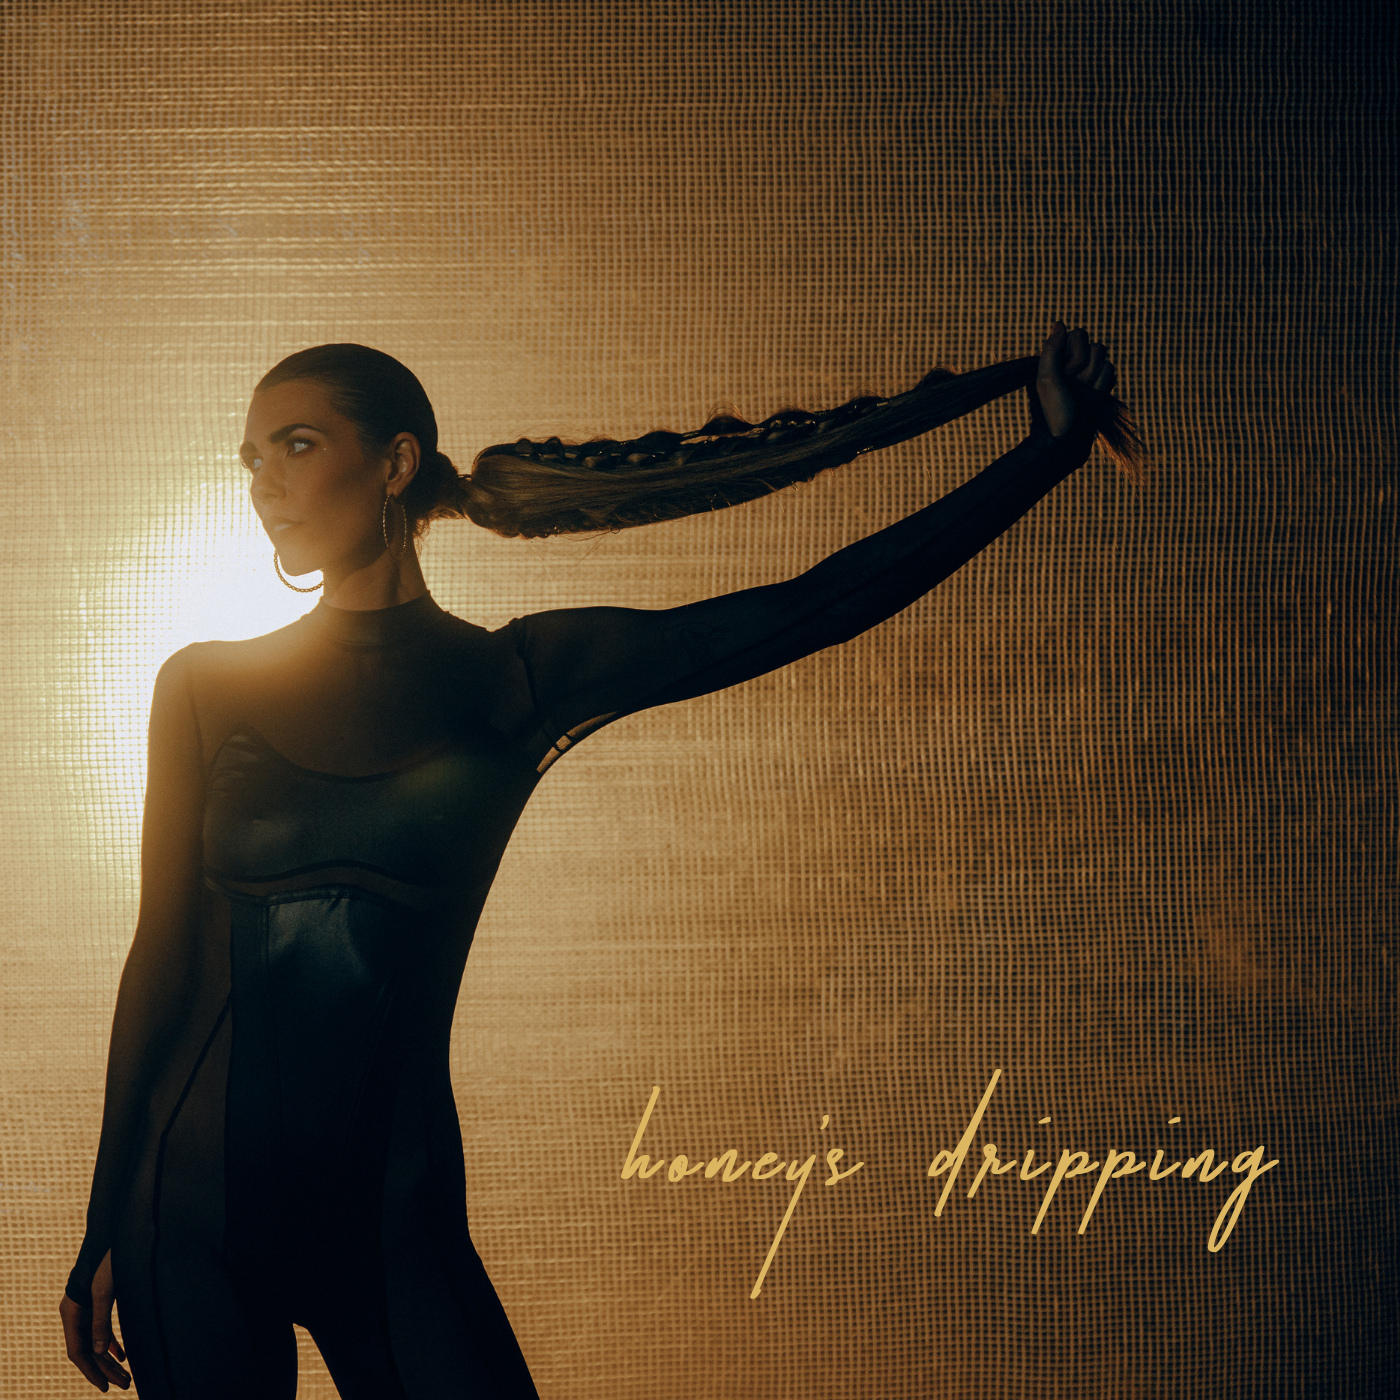 Honey's Dripping Album Cover.png